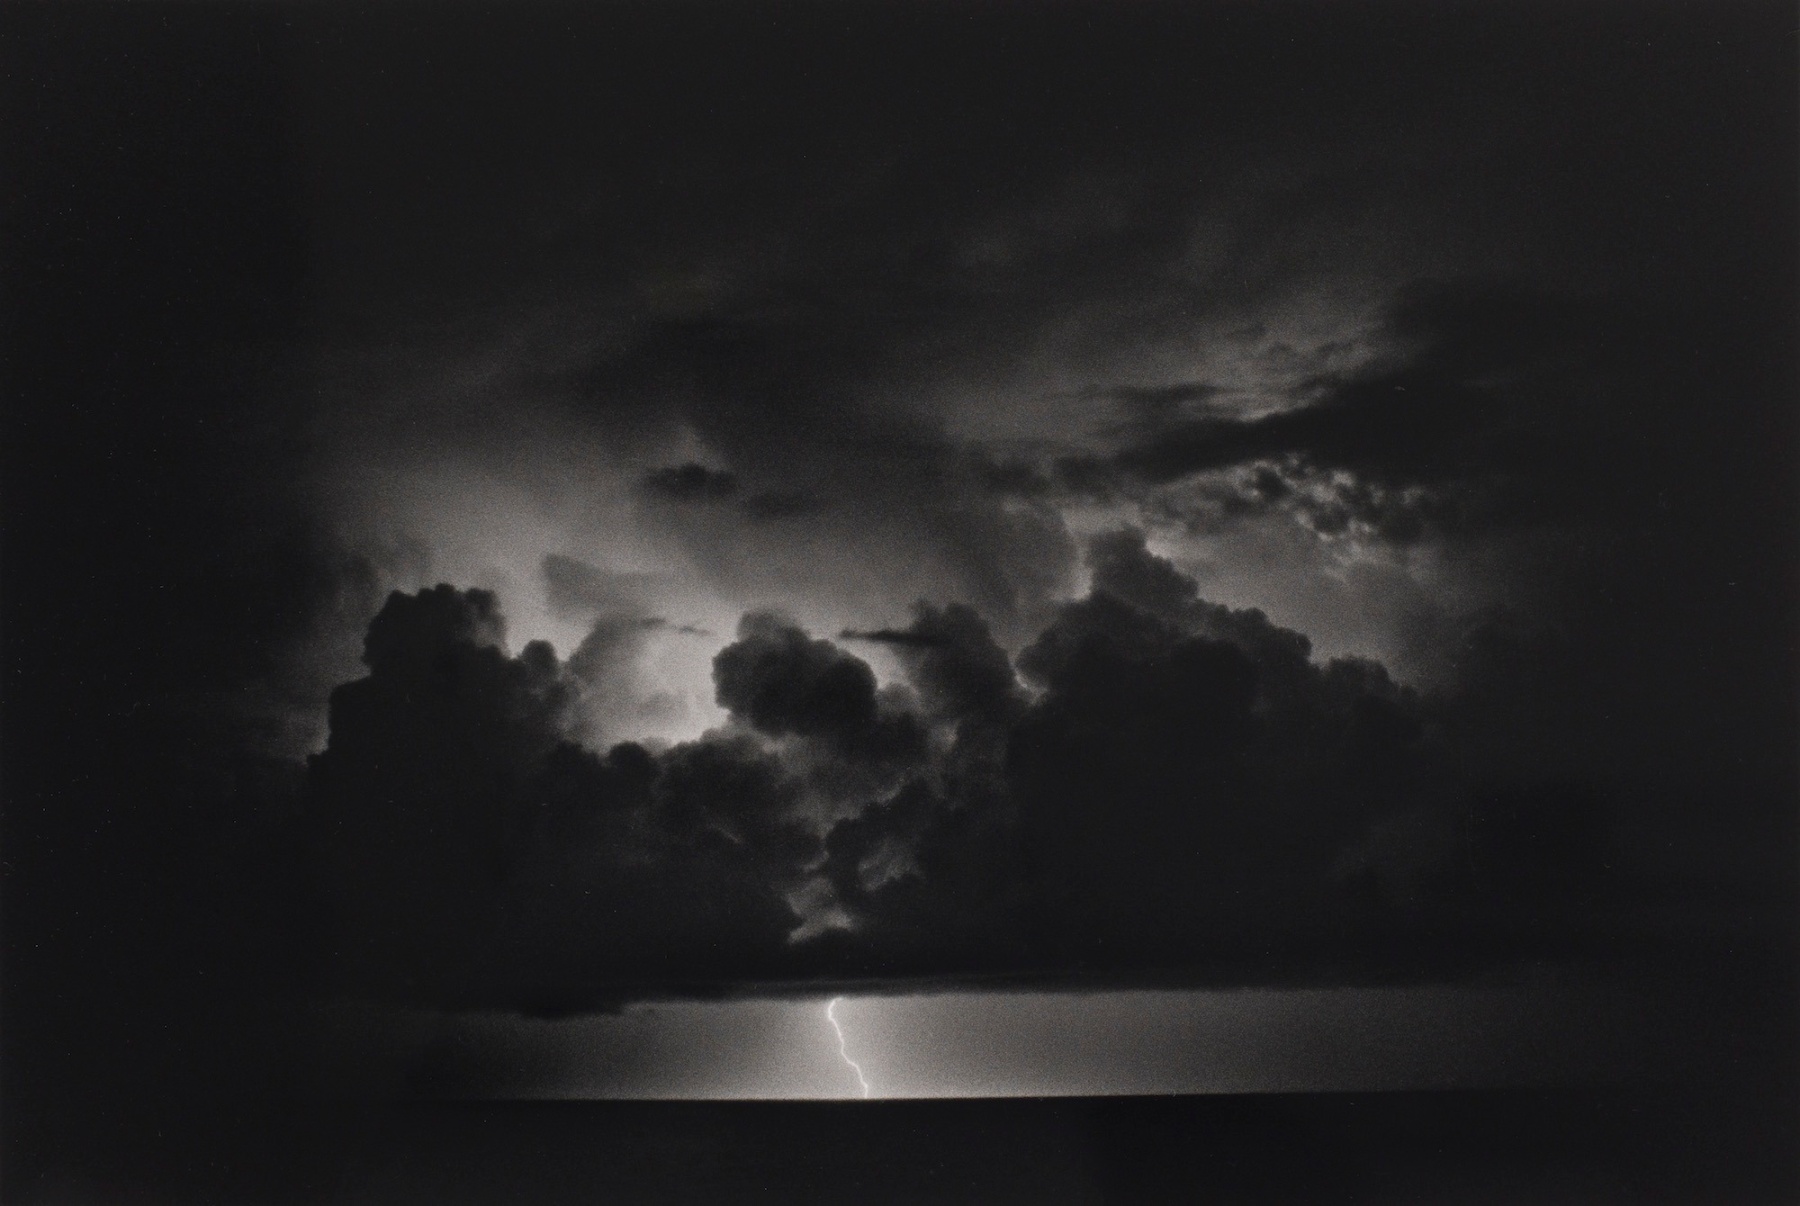 Bernard Plossu (1945-)  The Storm of Ulysses, 1988  Gelatin silver print  11 x 14 inches (paper), black and white photography